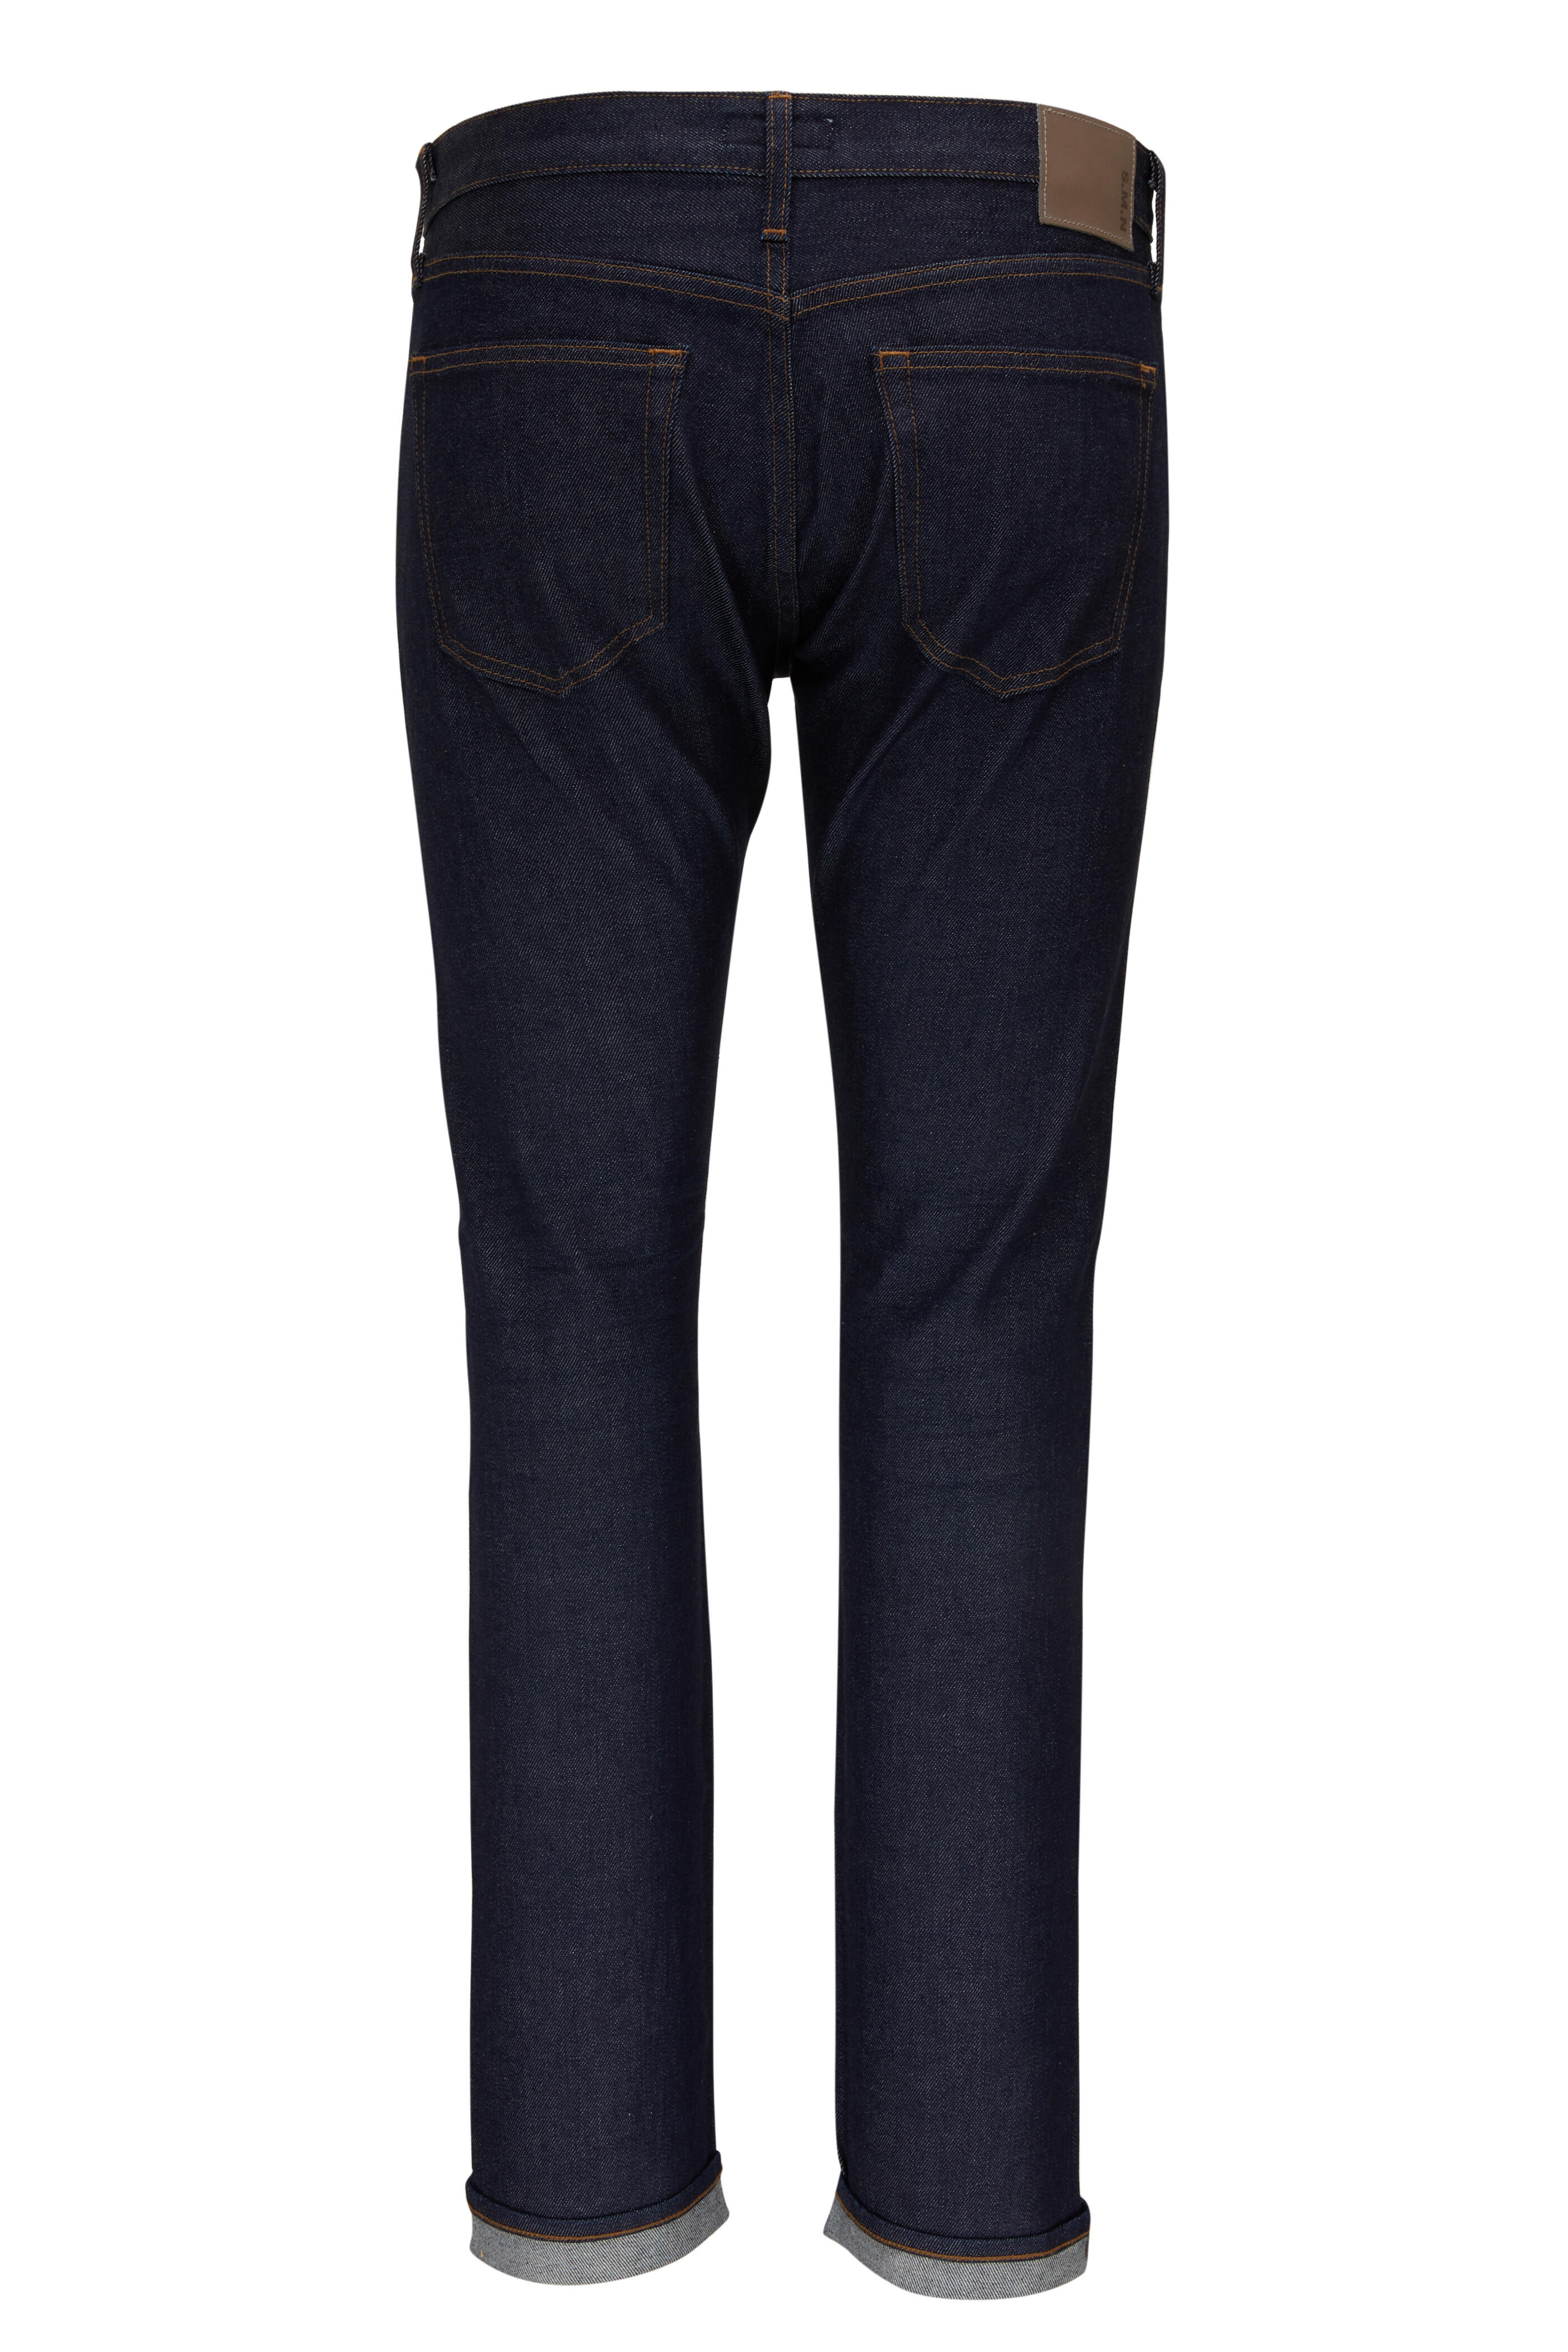 S.M.N. - The Hunter Jace Standard Slim Jean | Mitchell Stores